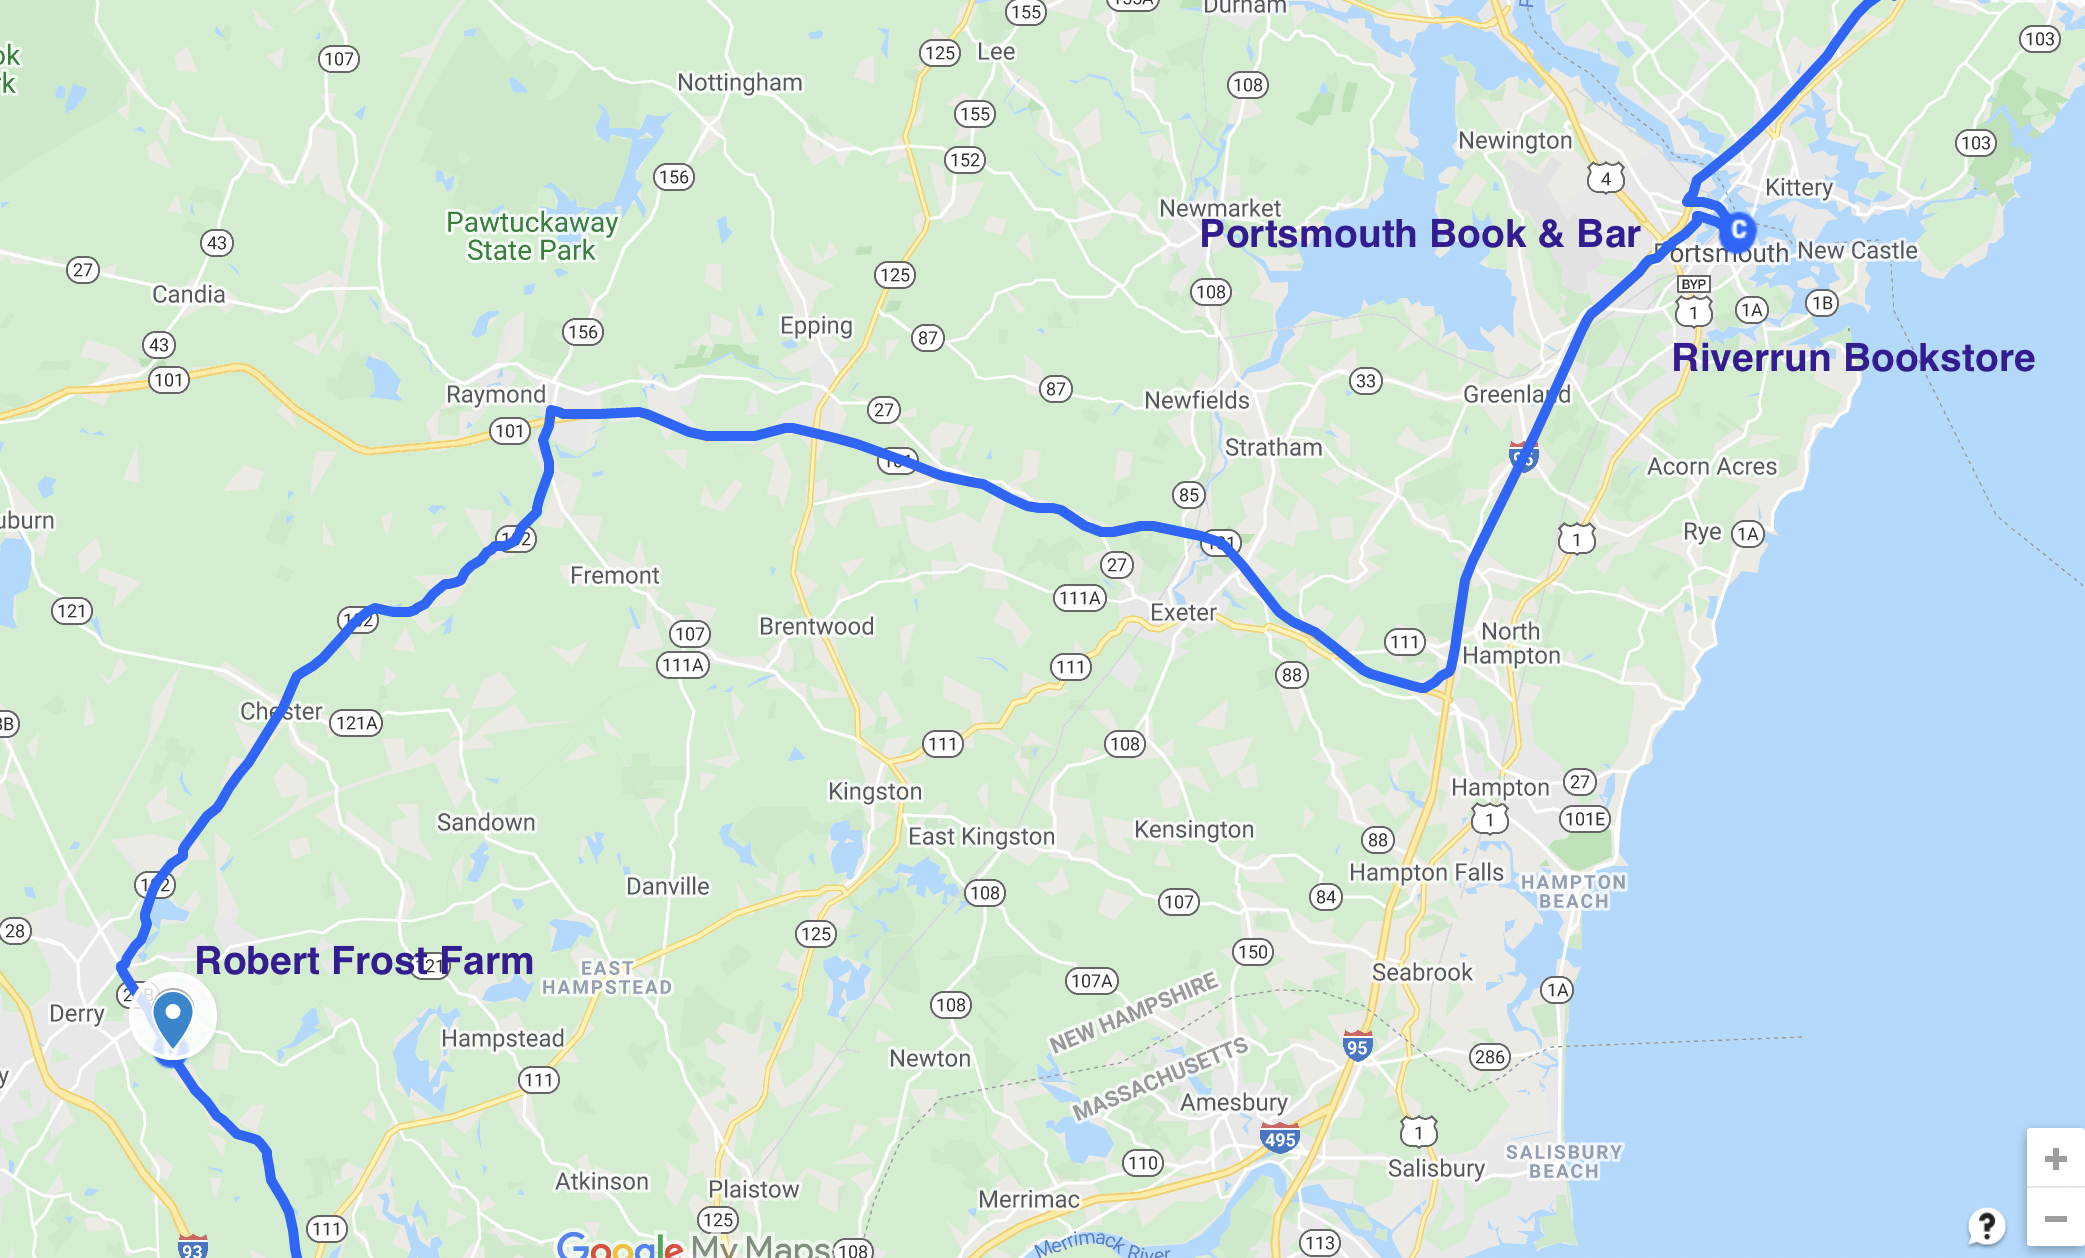 road map of literary stops in portsmouth and derry new hampshire